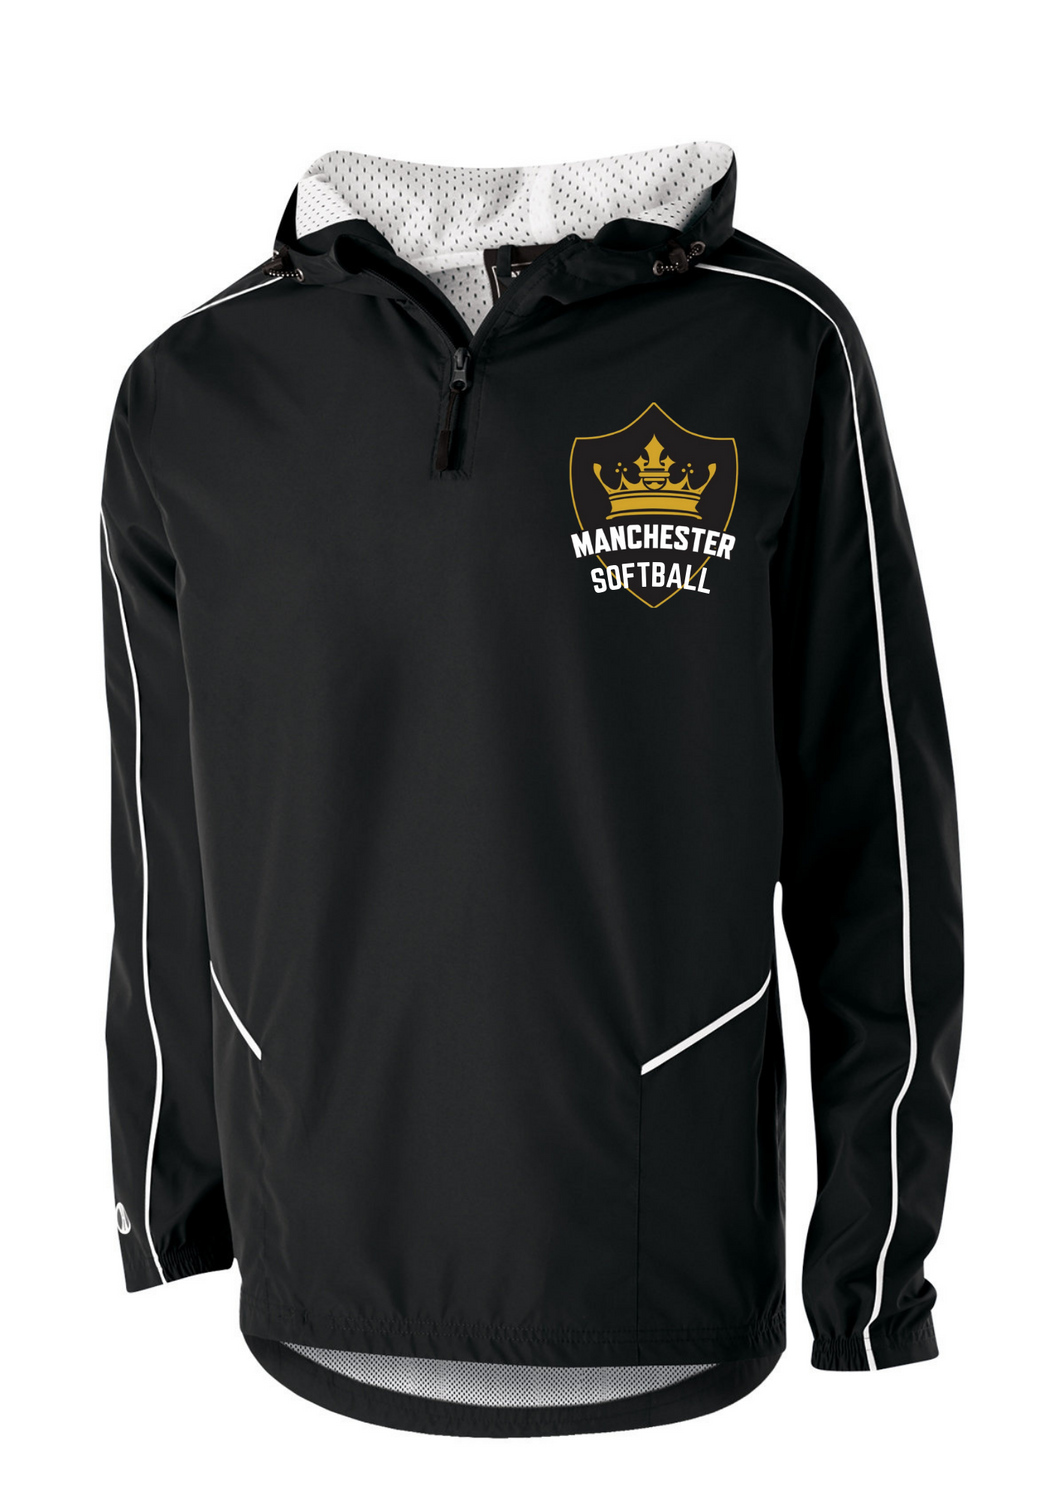 Manchester Softball Unisex Windbreaker with Embroidered Logo